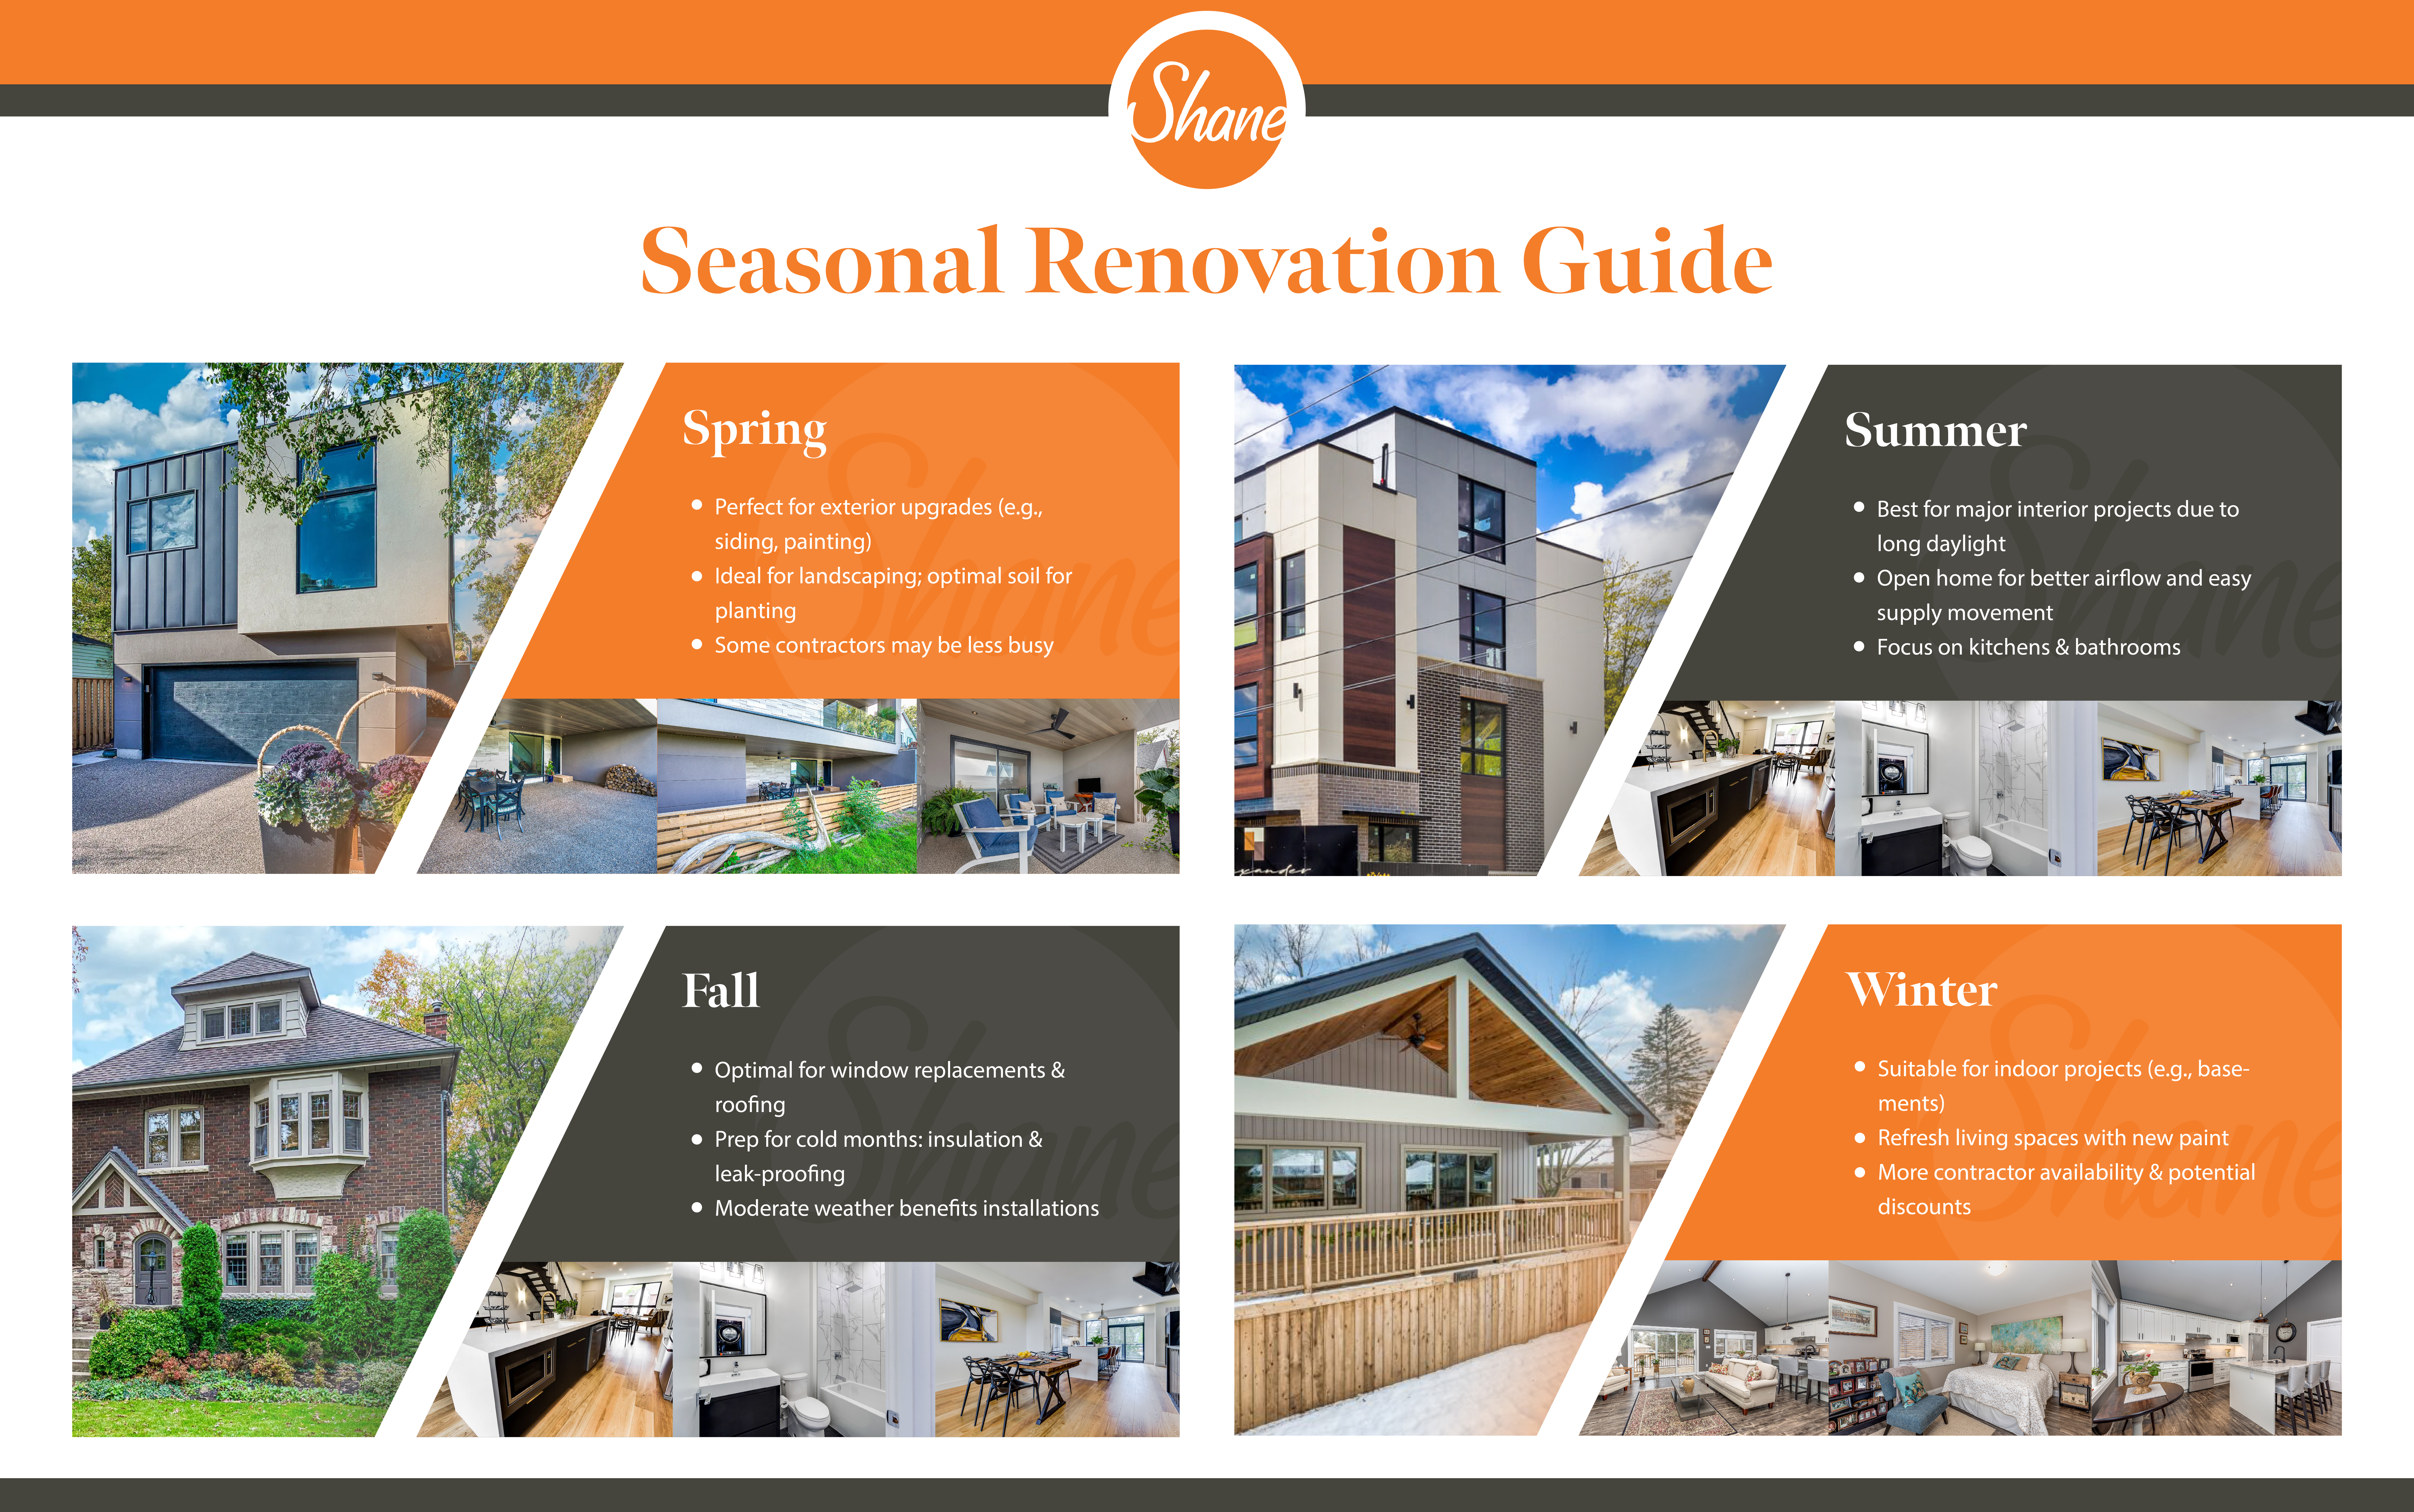 seasonal renovation guide - The Best Times of Year to Renovate Each Part of Your Home